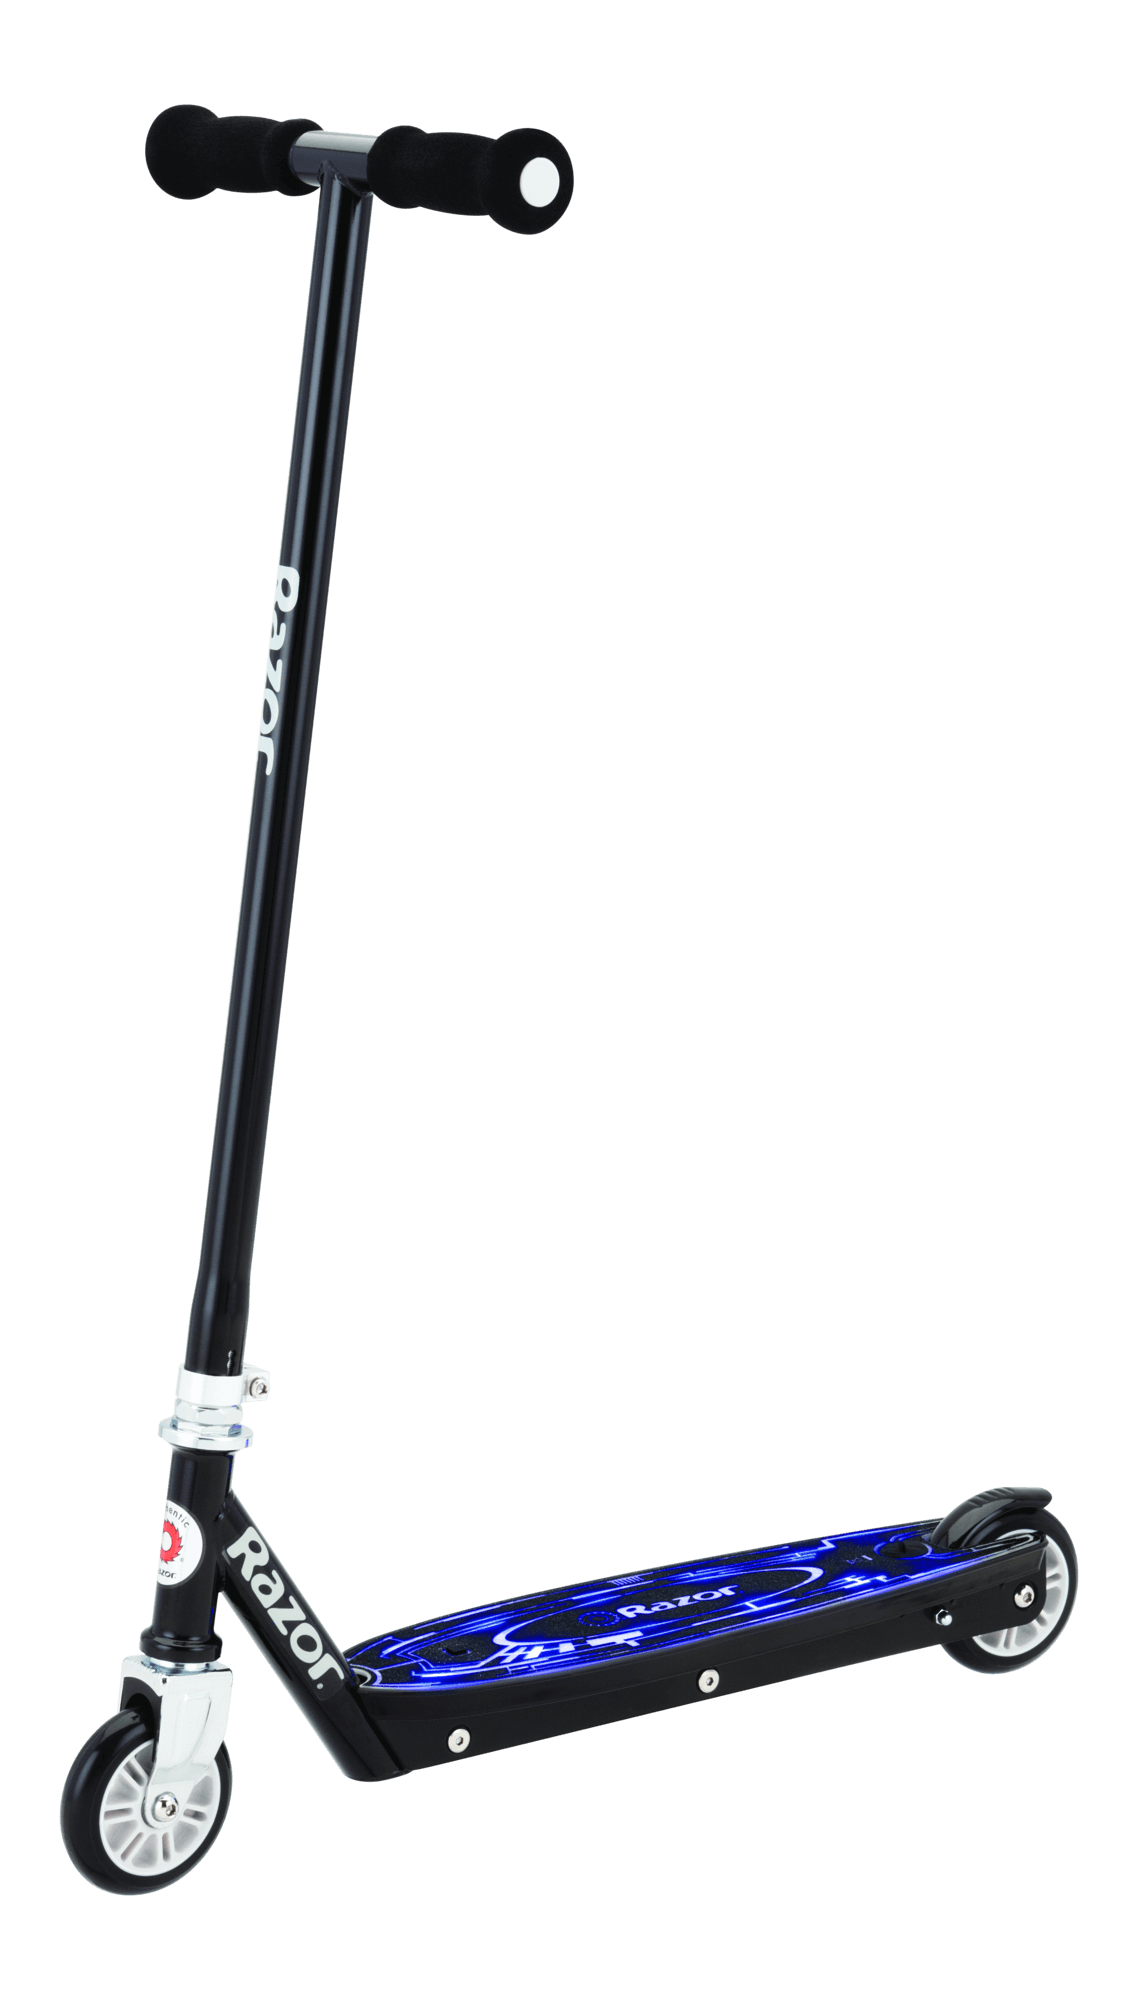 Razor Pick Scooter PNG Images HD